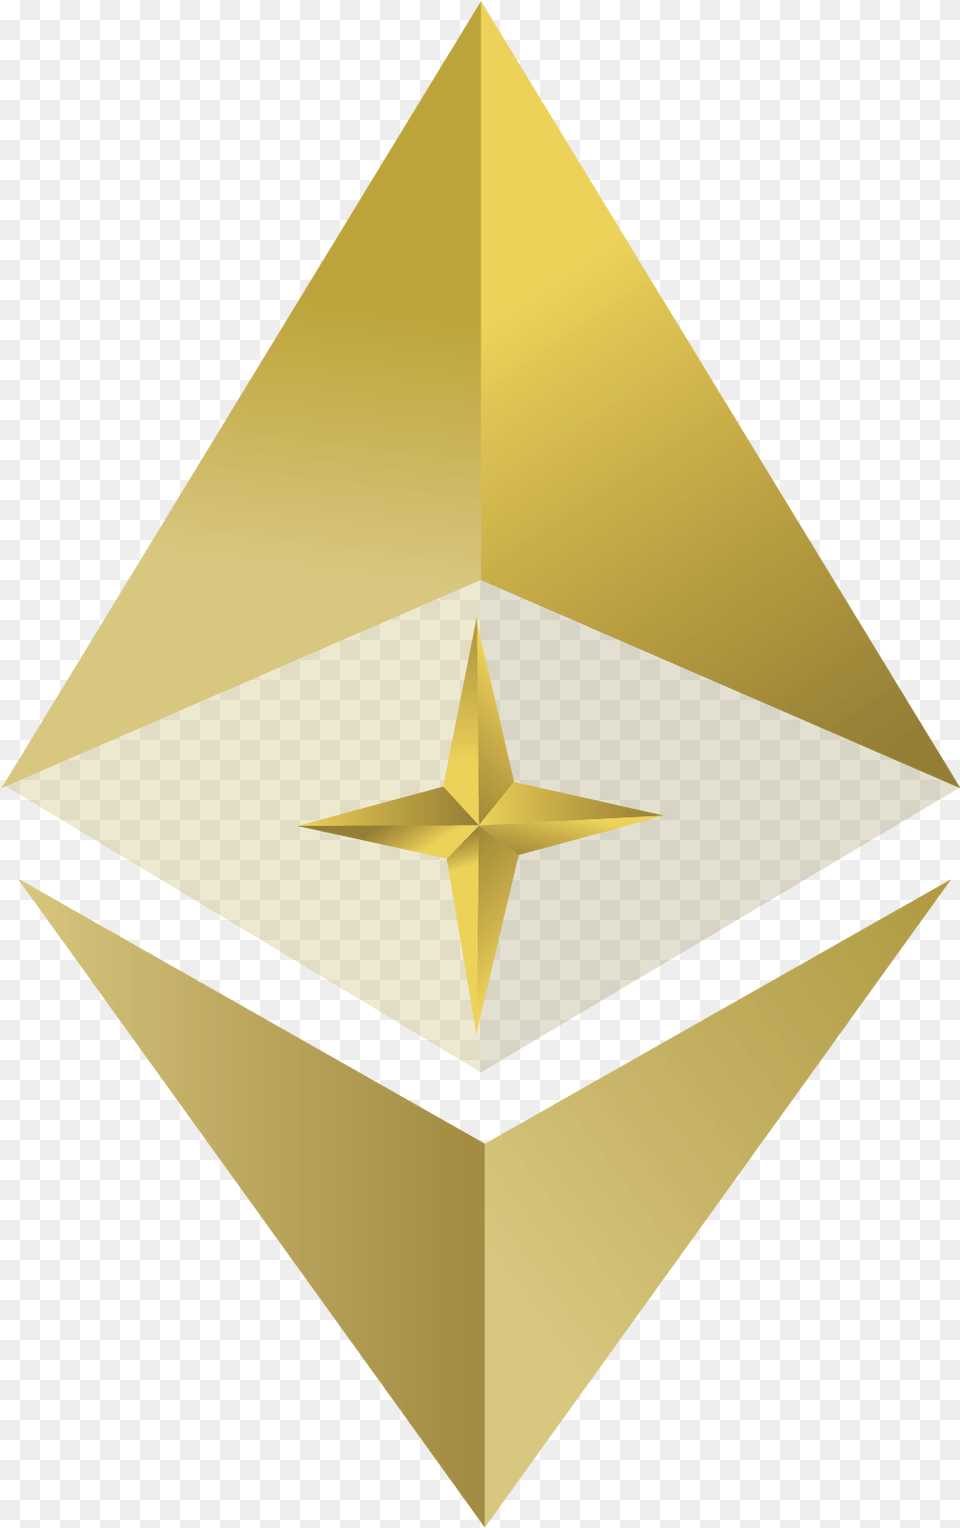 Download Offering Gold Initial Bitcoin Virtual Currency Ethereum Logo Png Image